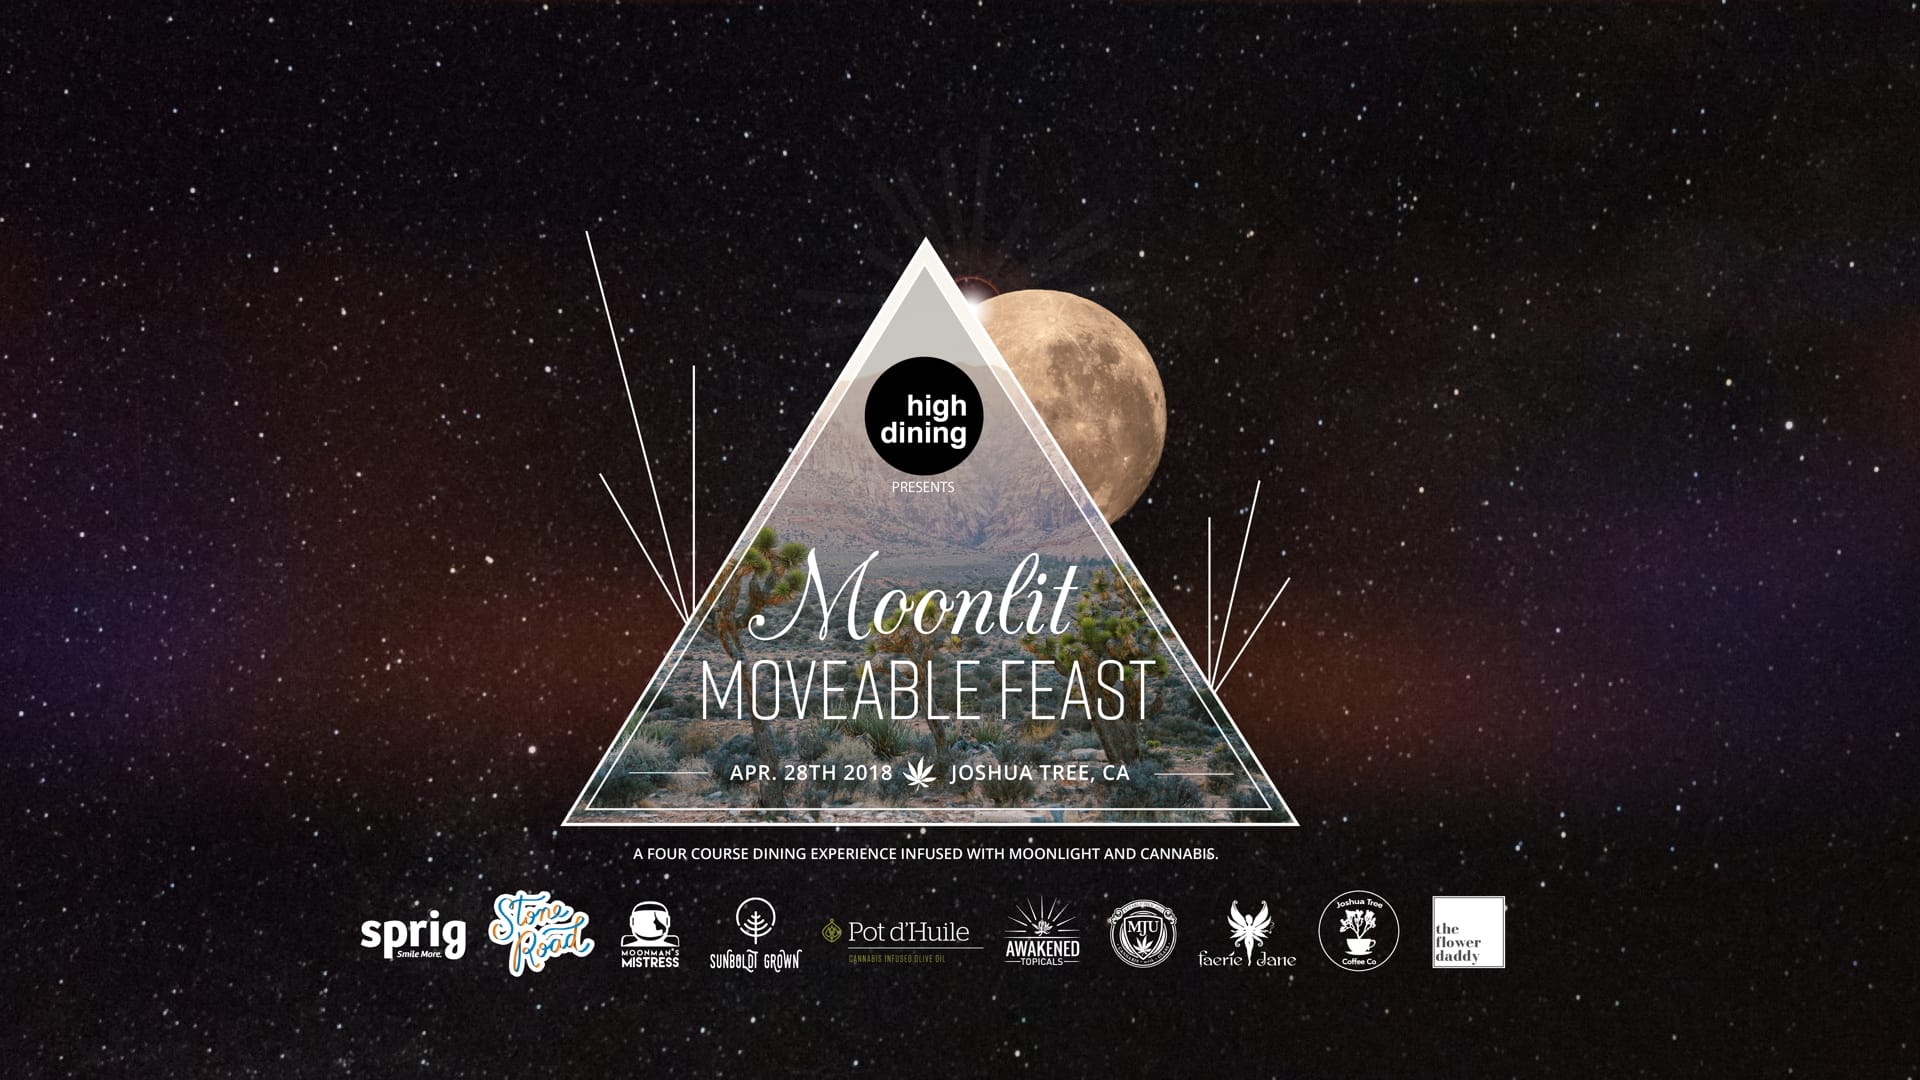 Moonlit Moveable Feast